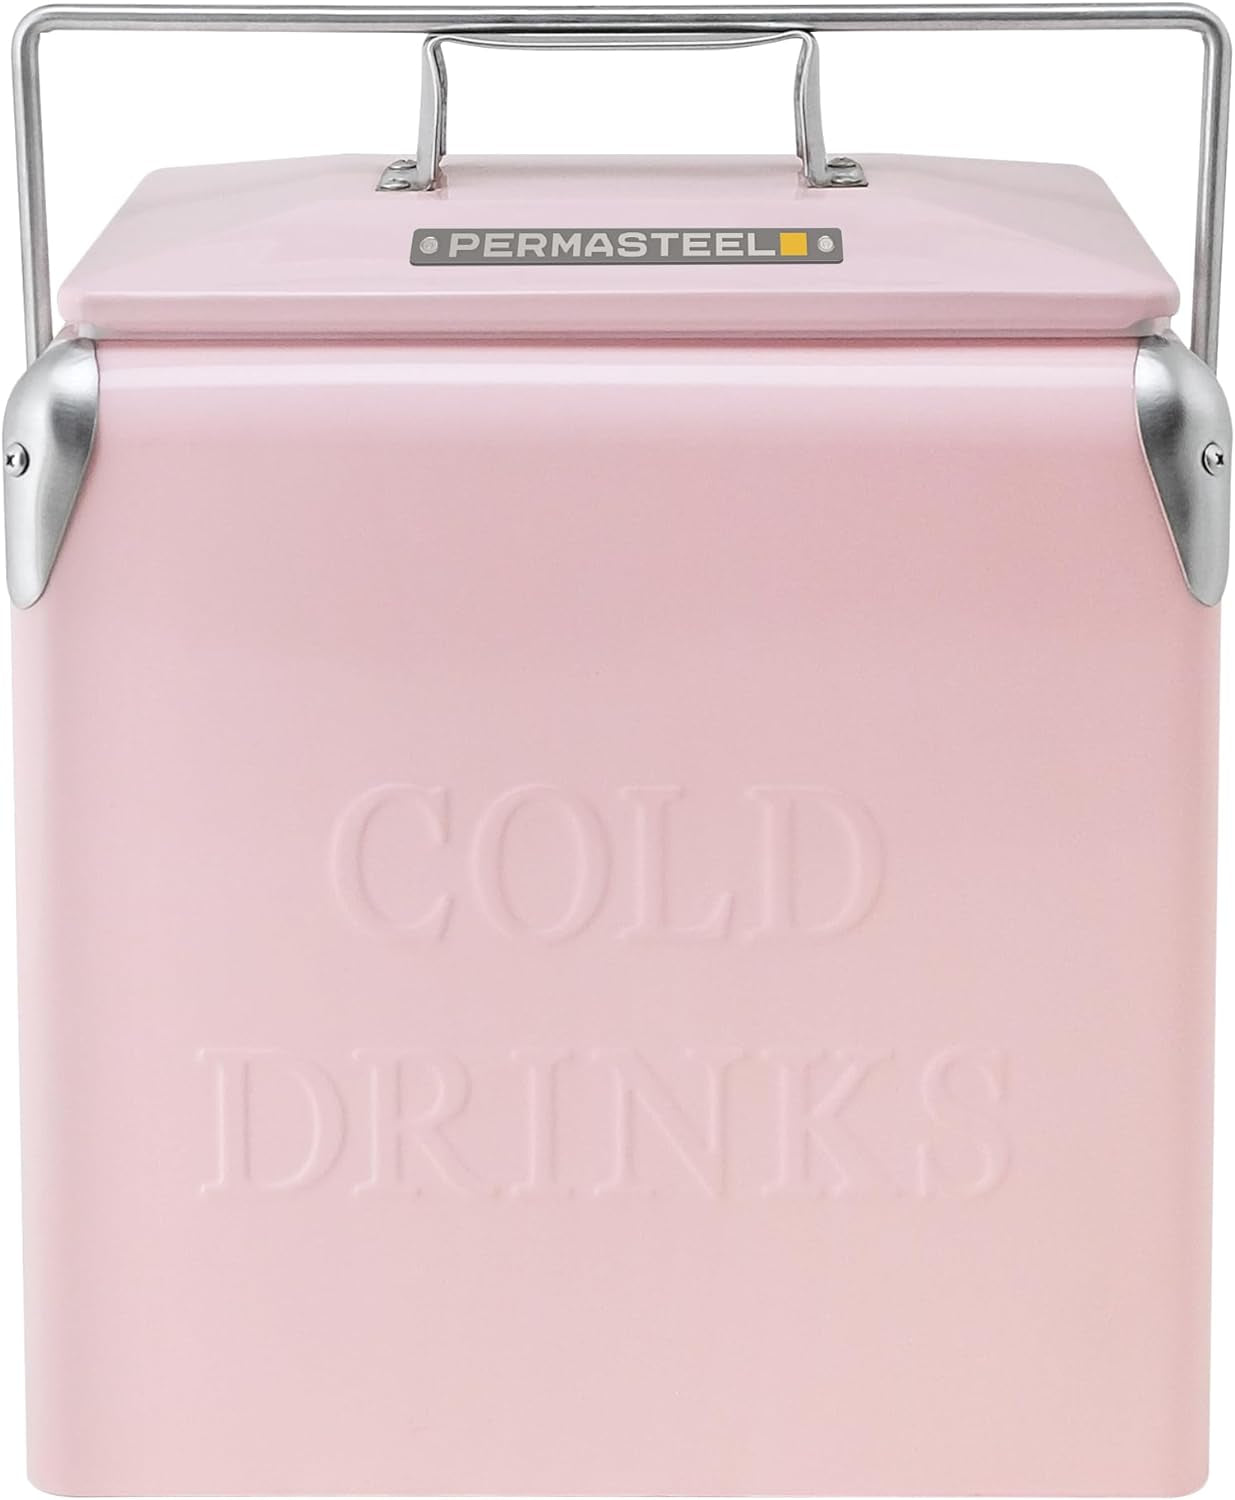 14-Quart Small Cooler Ice Chest | Retro Vintage Classic Style Hard Metal Cooler, PS-A205-14QT-PK, Beverage Cooler for Camping Beach Picnic, Pink